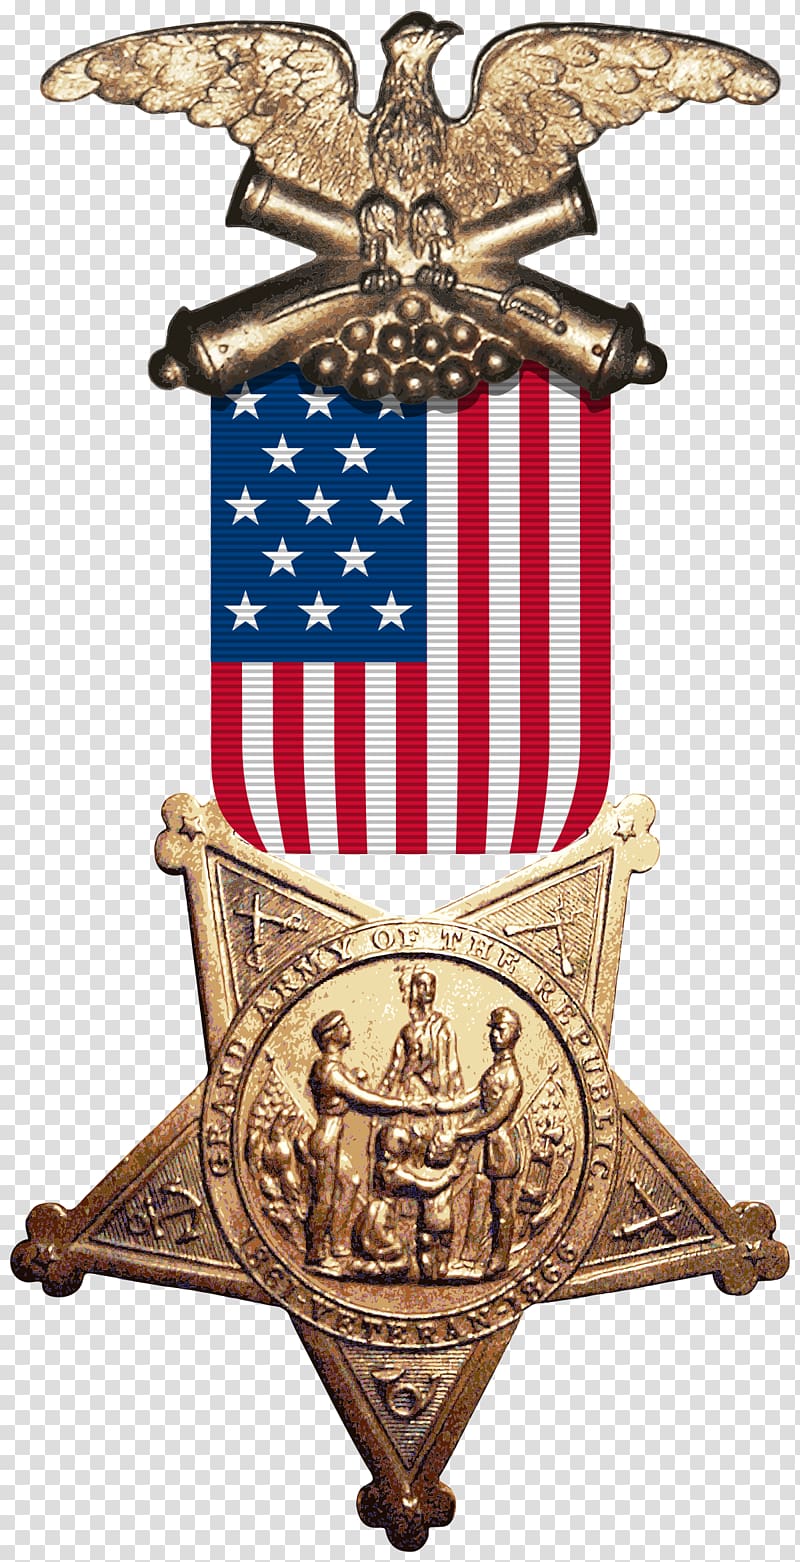 American Civil War Grand Army of the Republic Union Army Sons of Union Veterans of the Civil War, united states transparent background PNG clipart